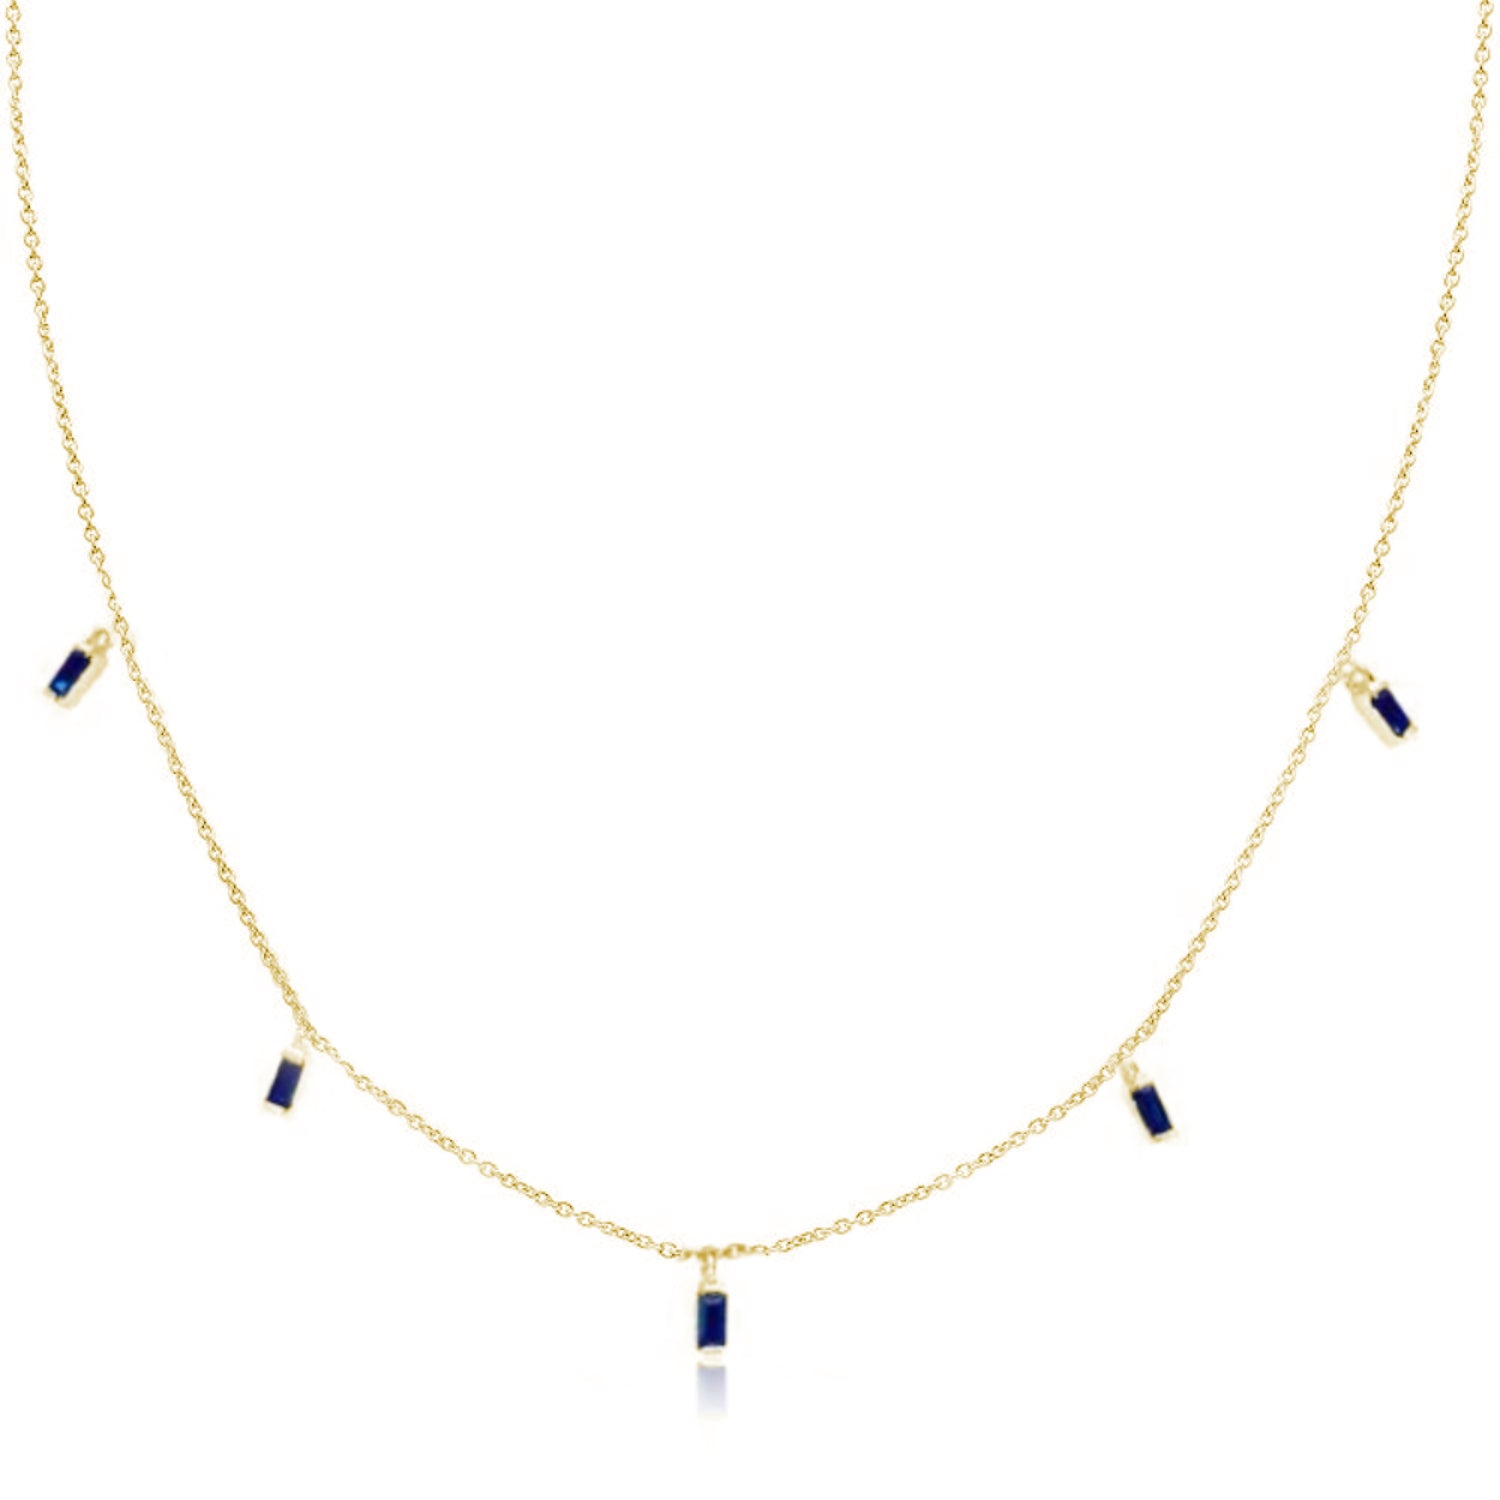 Floating Baguette Cut Blue Sapphire Necklace in Yellow Gold